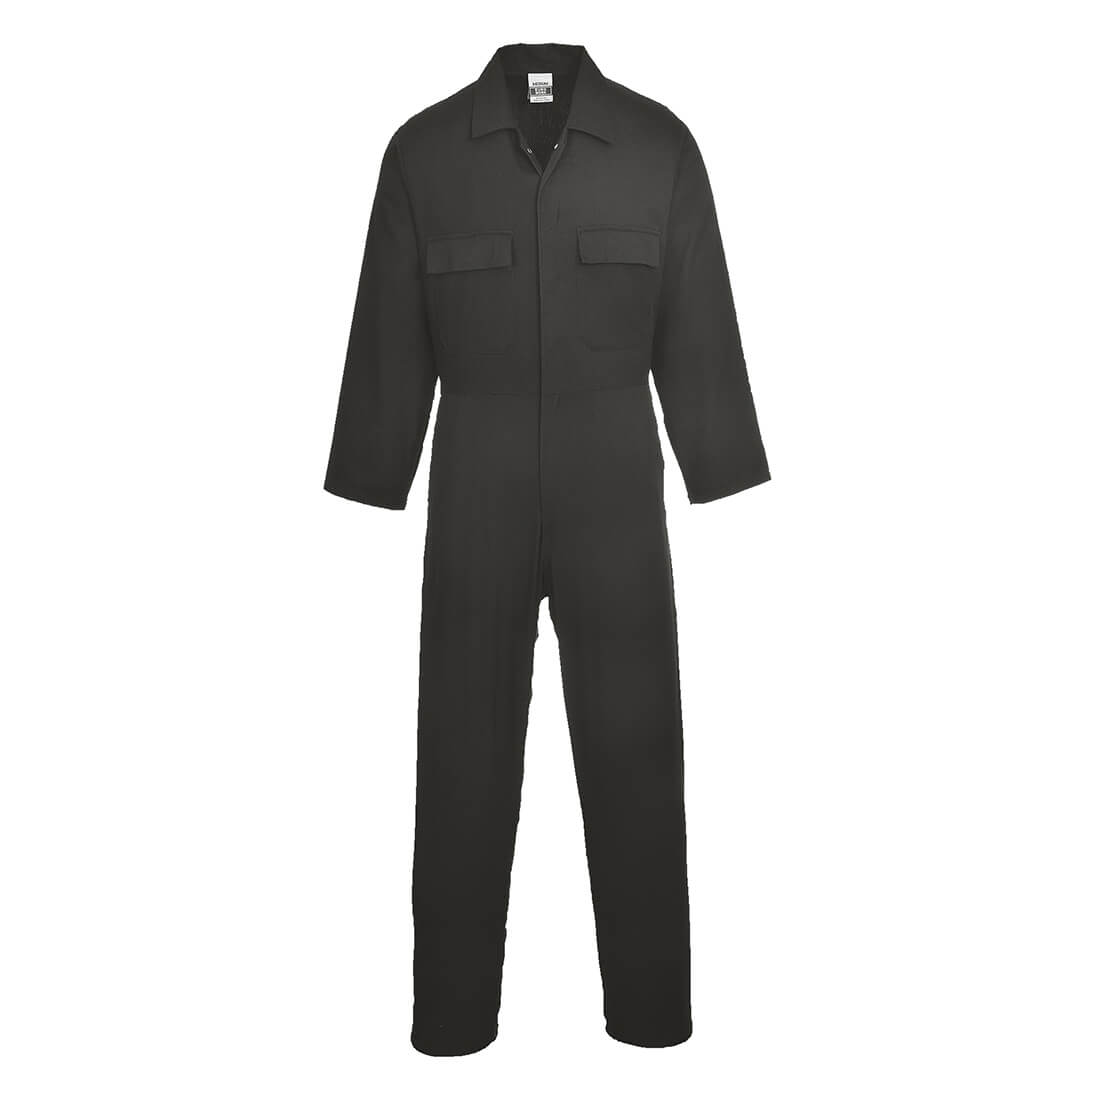 Euro Work Cotton Coverall - Safetywear